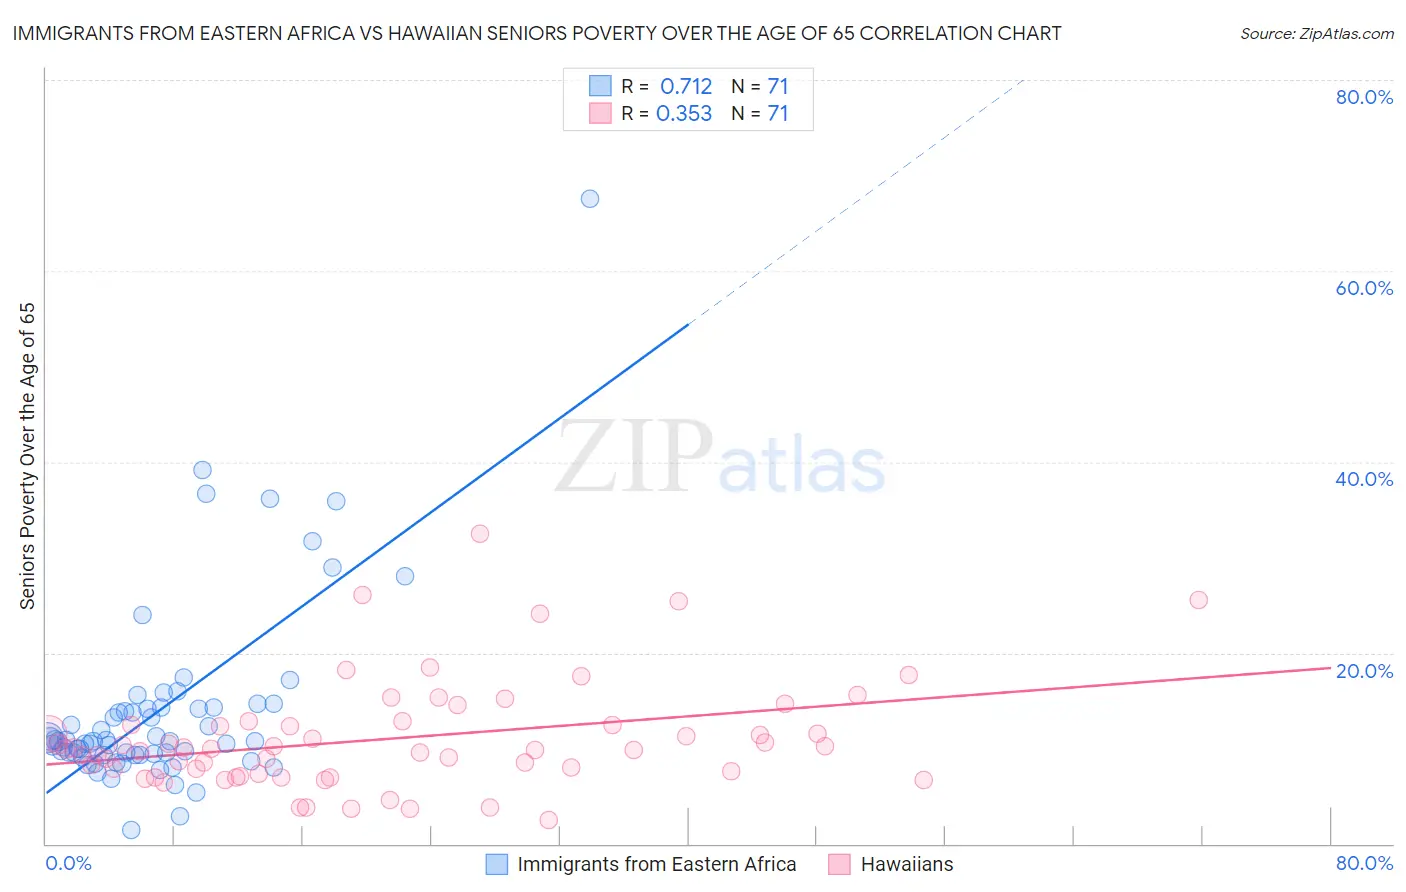 Immigrants from Eastern Africa vs Hawaiian Seniors Poverty Over the Age of 65